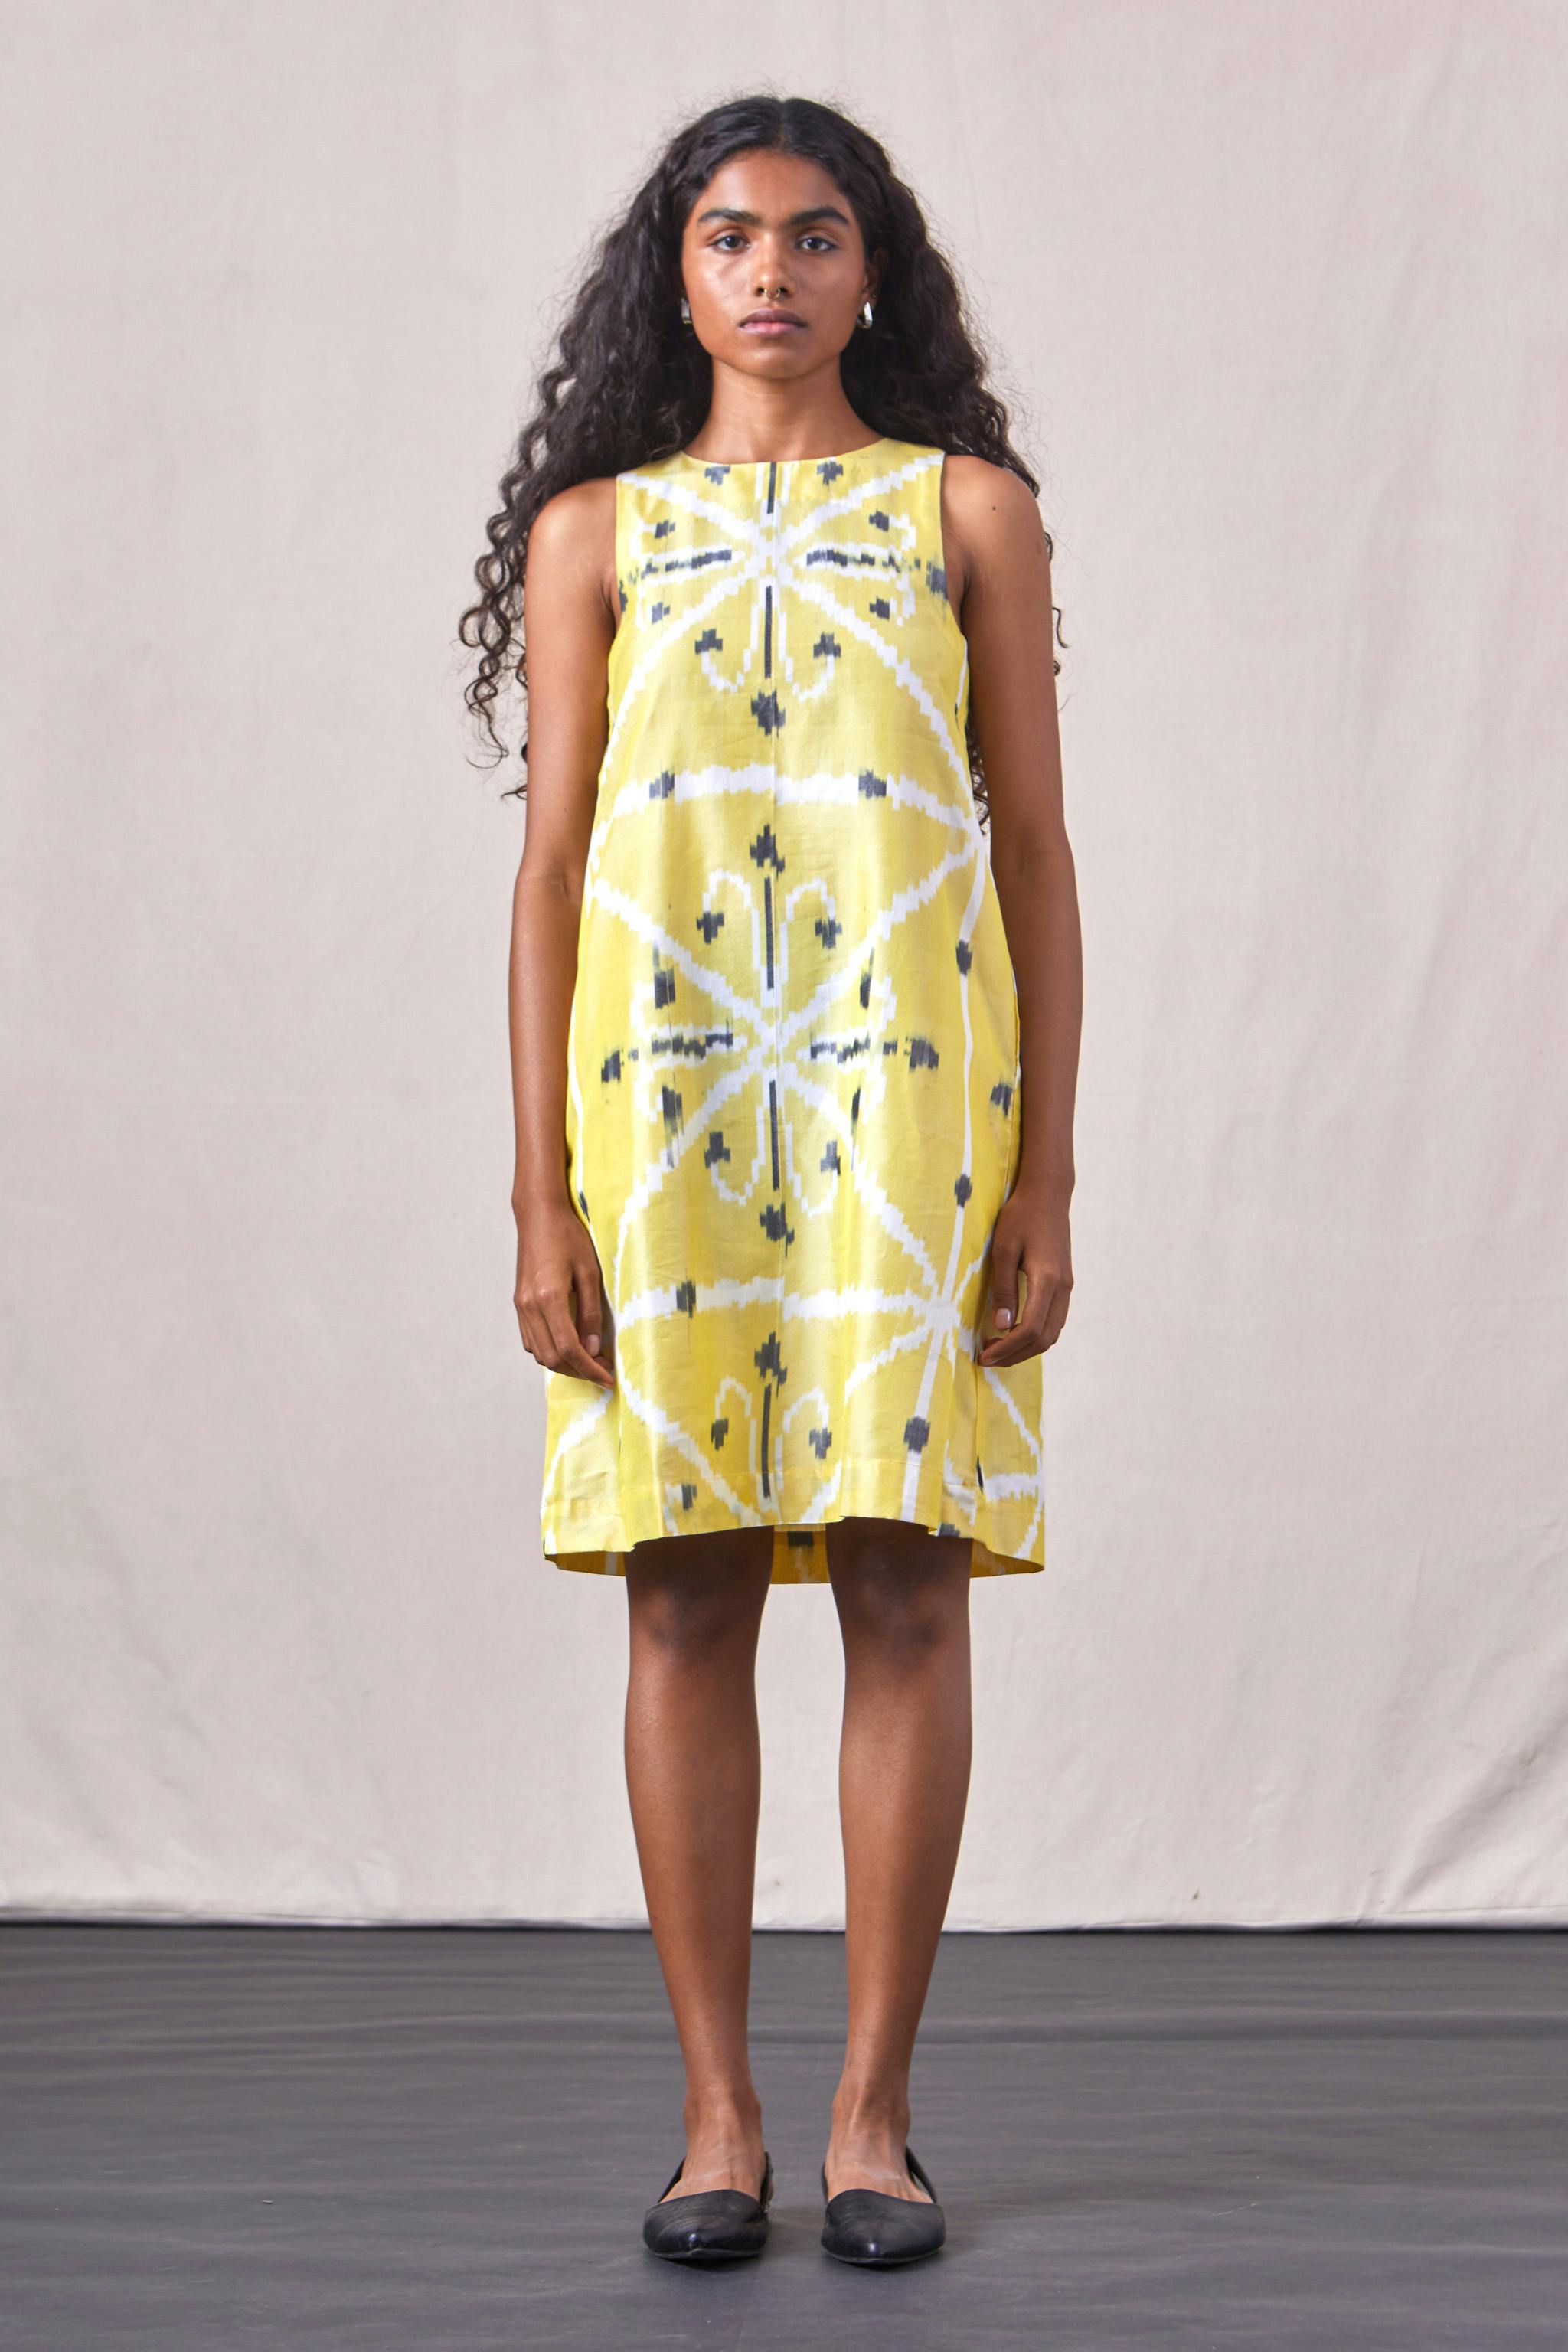 Kalai - Ikat Dress Yellow, a product by The Summer House